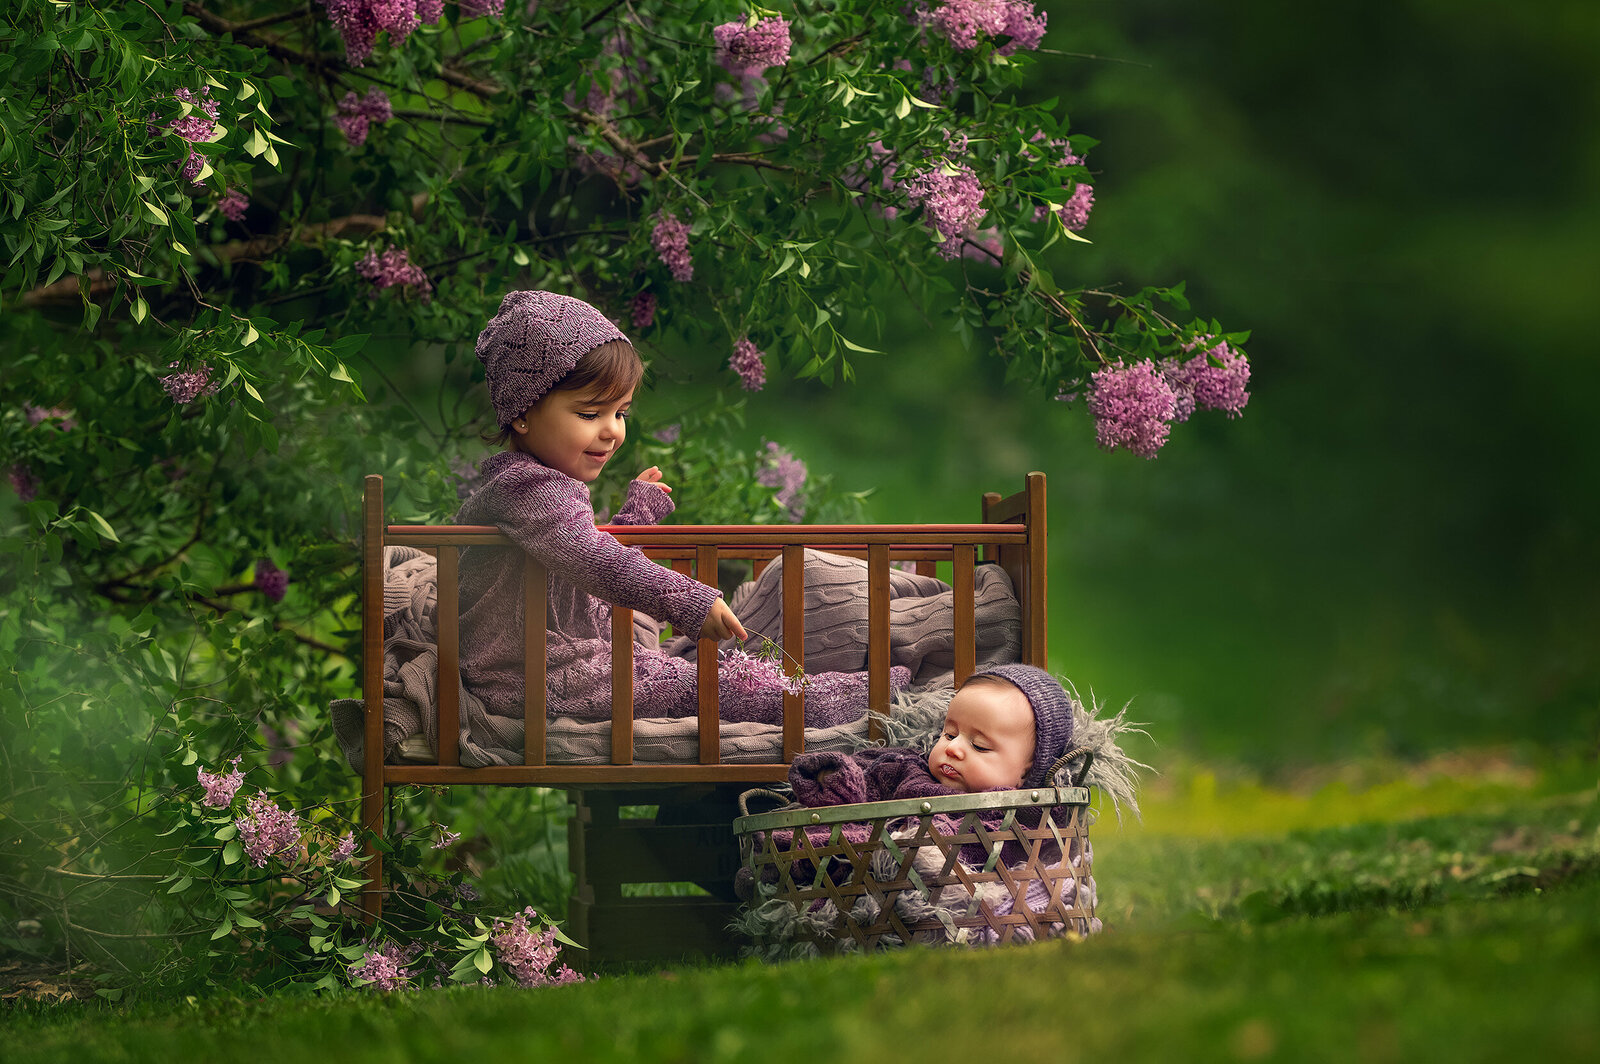 Two little girls, both dressed in purple, are seated outdoors underneath a lilac tree.